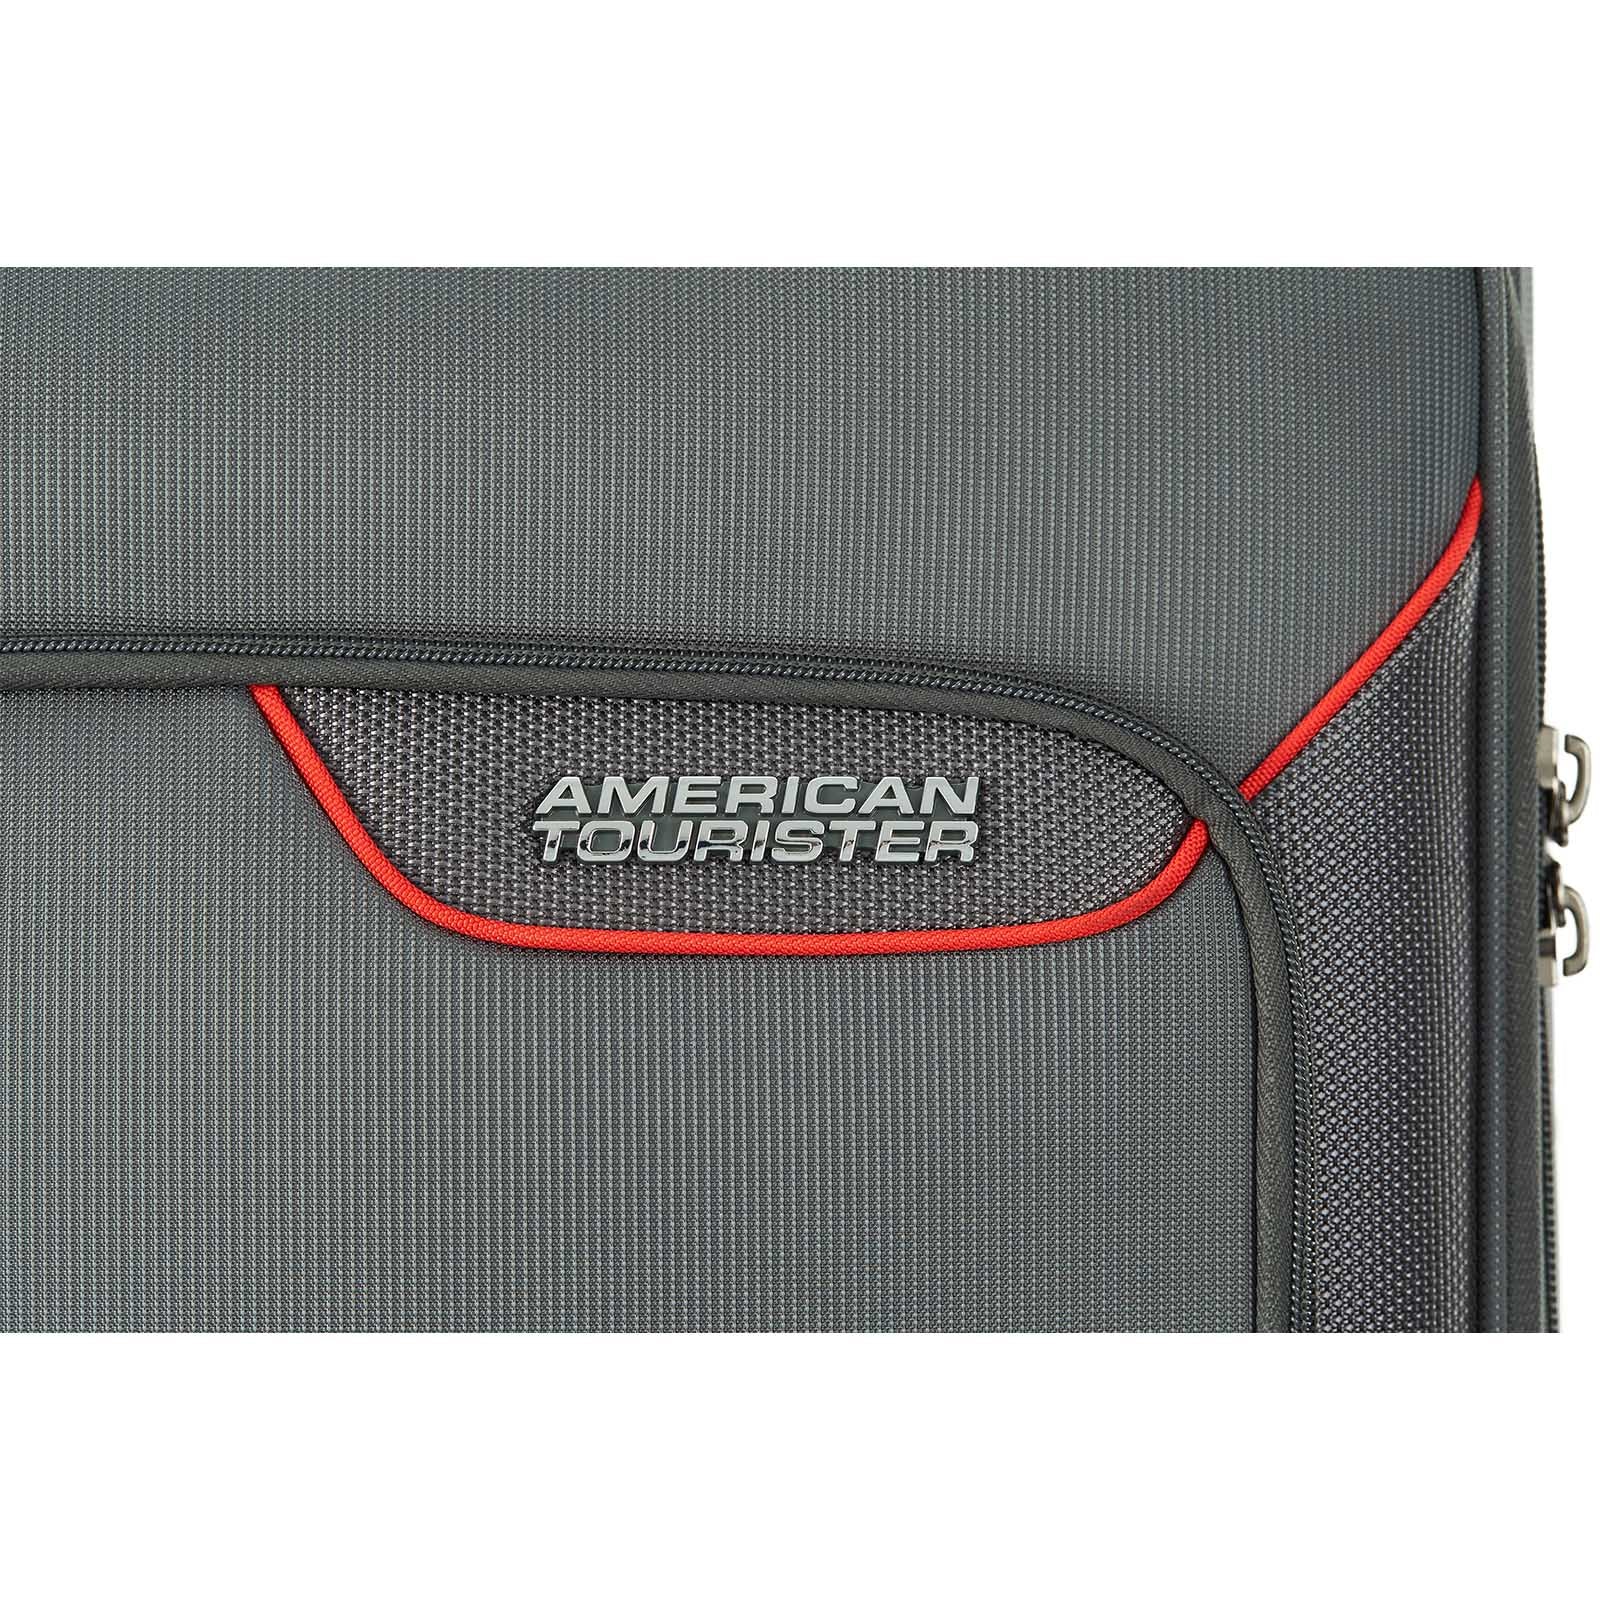 American-Tourister-Applite-4-Eco-71cm-Suitcase-Grey-Red-Logo